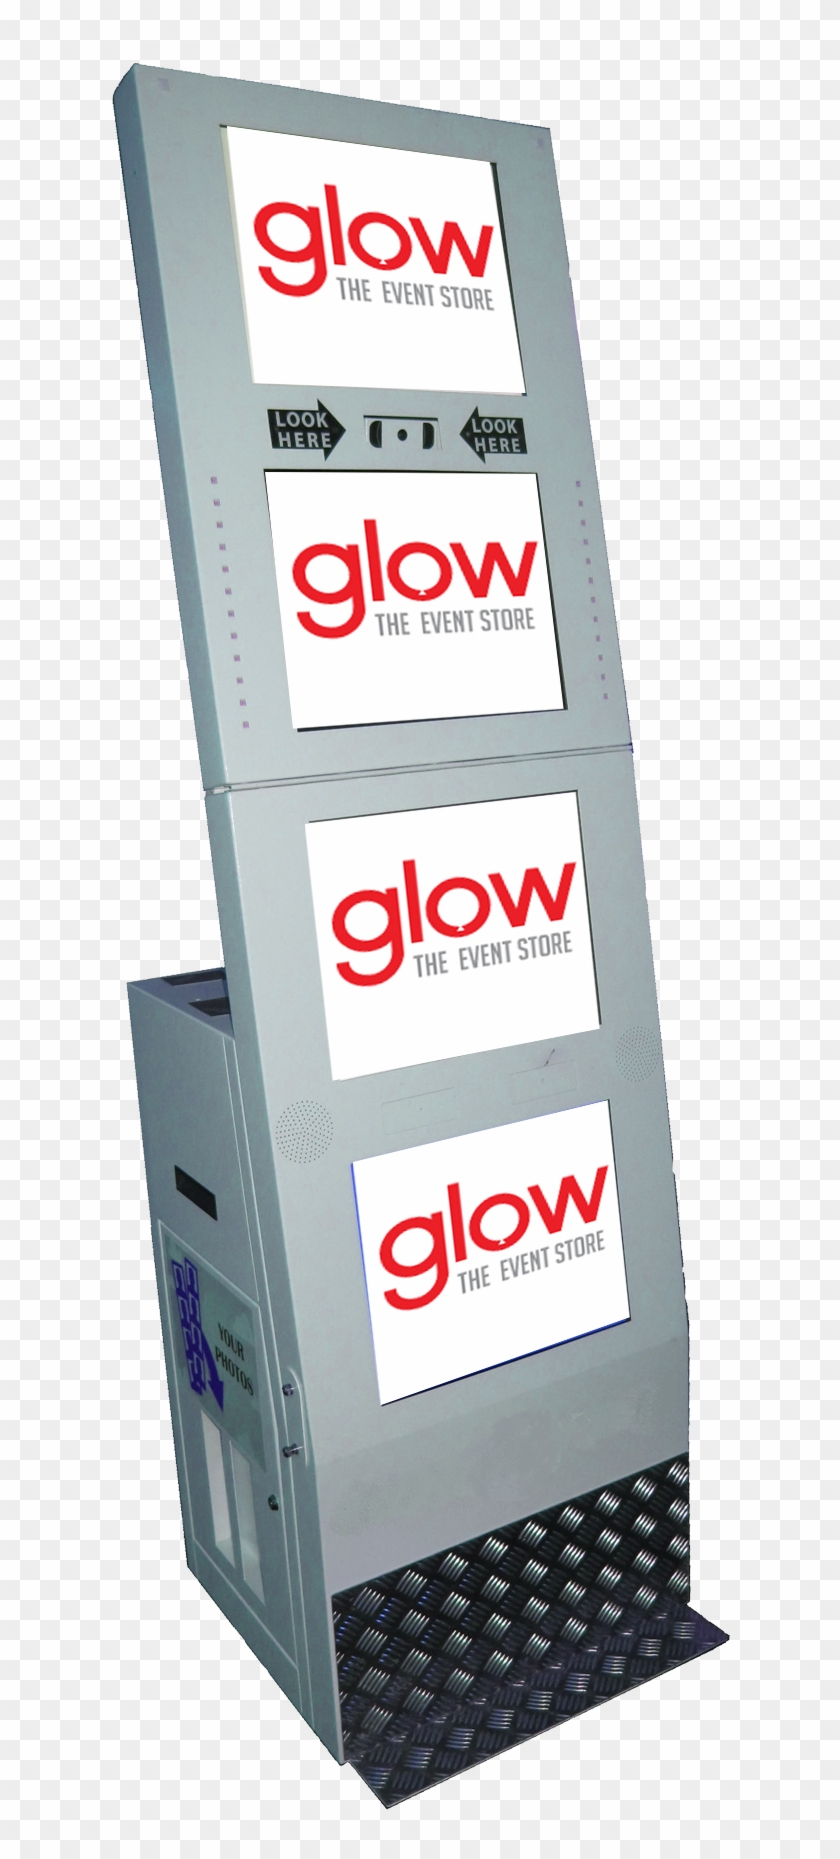 Glow The Event Store - Signage Clipart #3153453